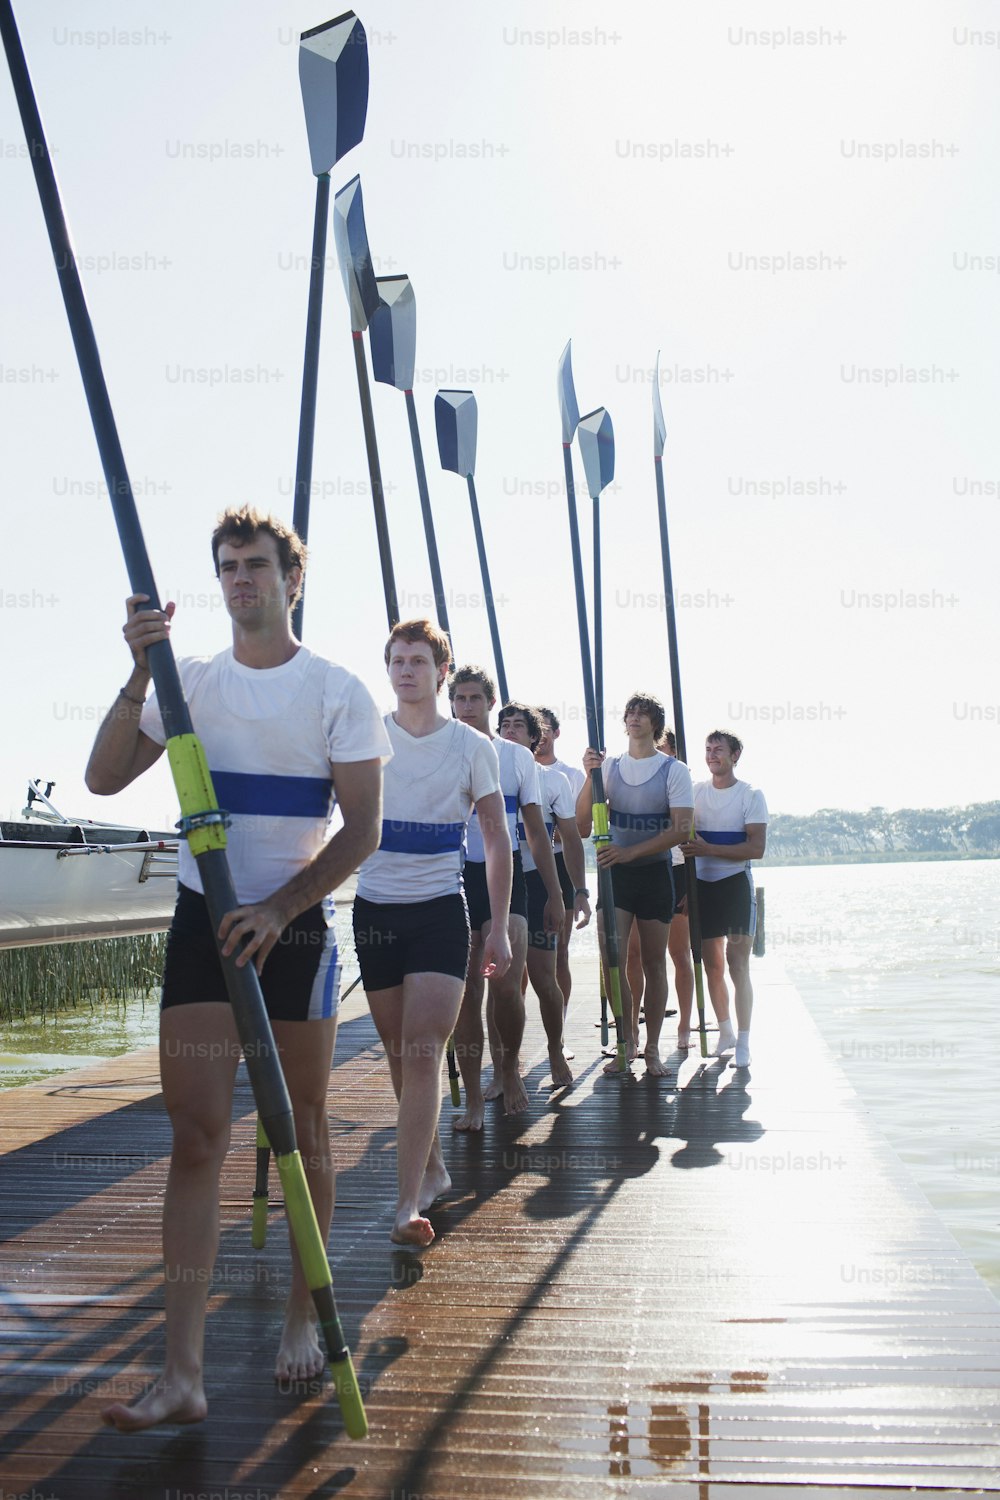 a group of people standing on a pier holding paddles